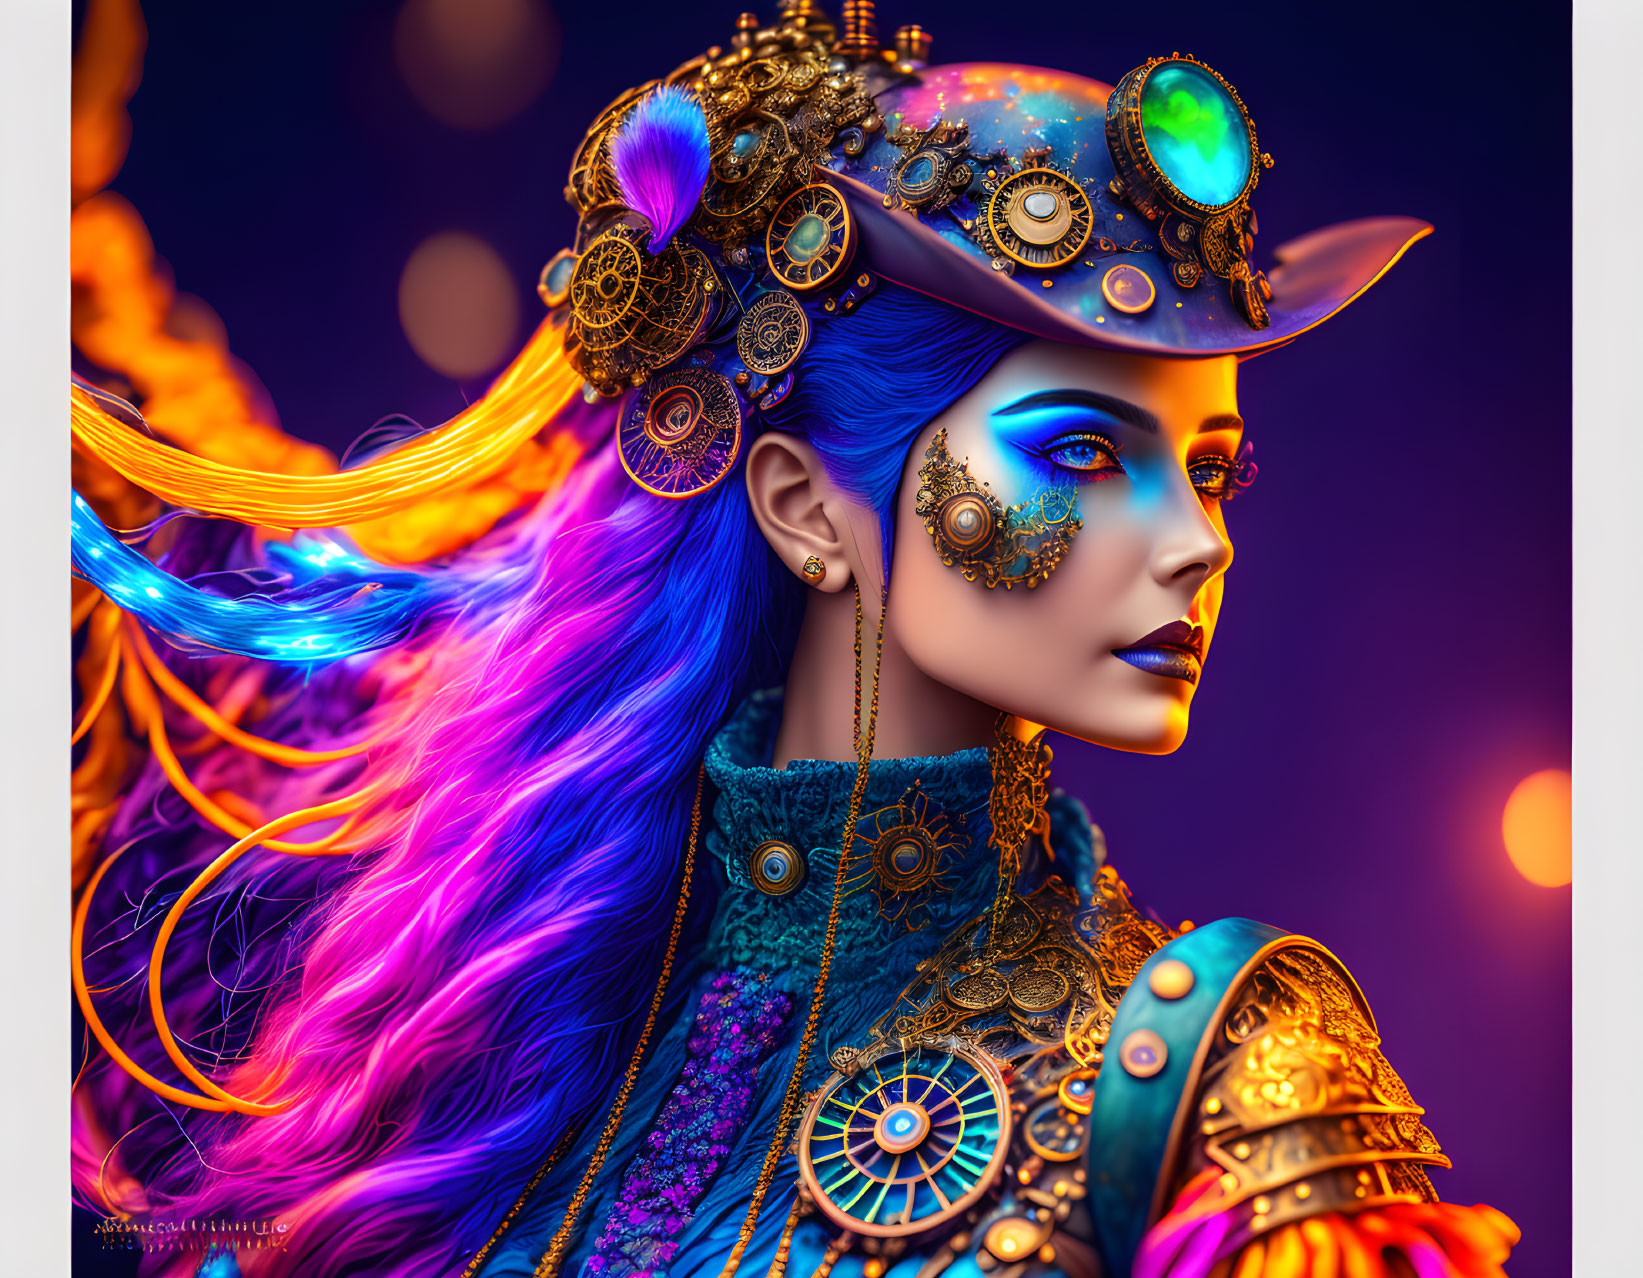 Colorful digital art: Woman with blue skin, steampunk hat, gear accessories on purple background